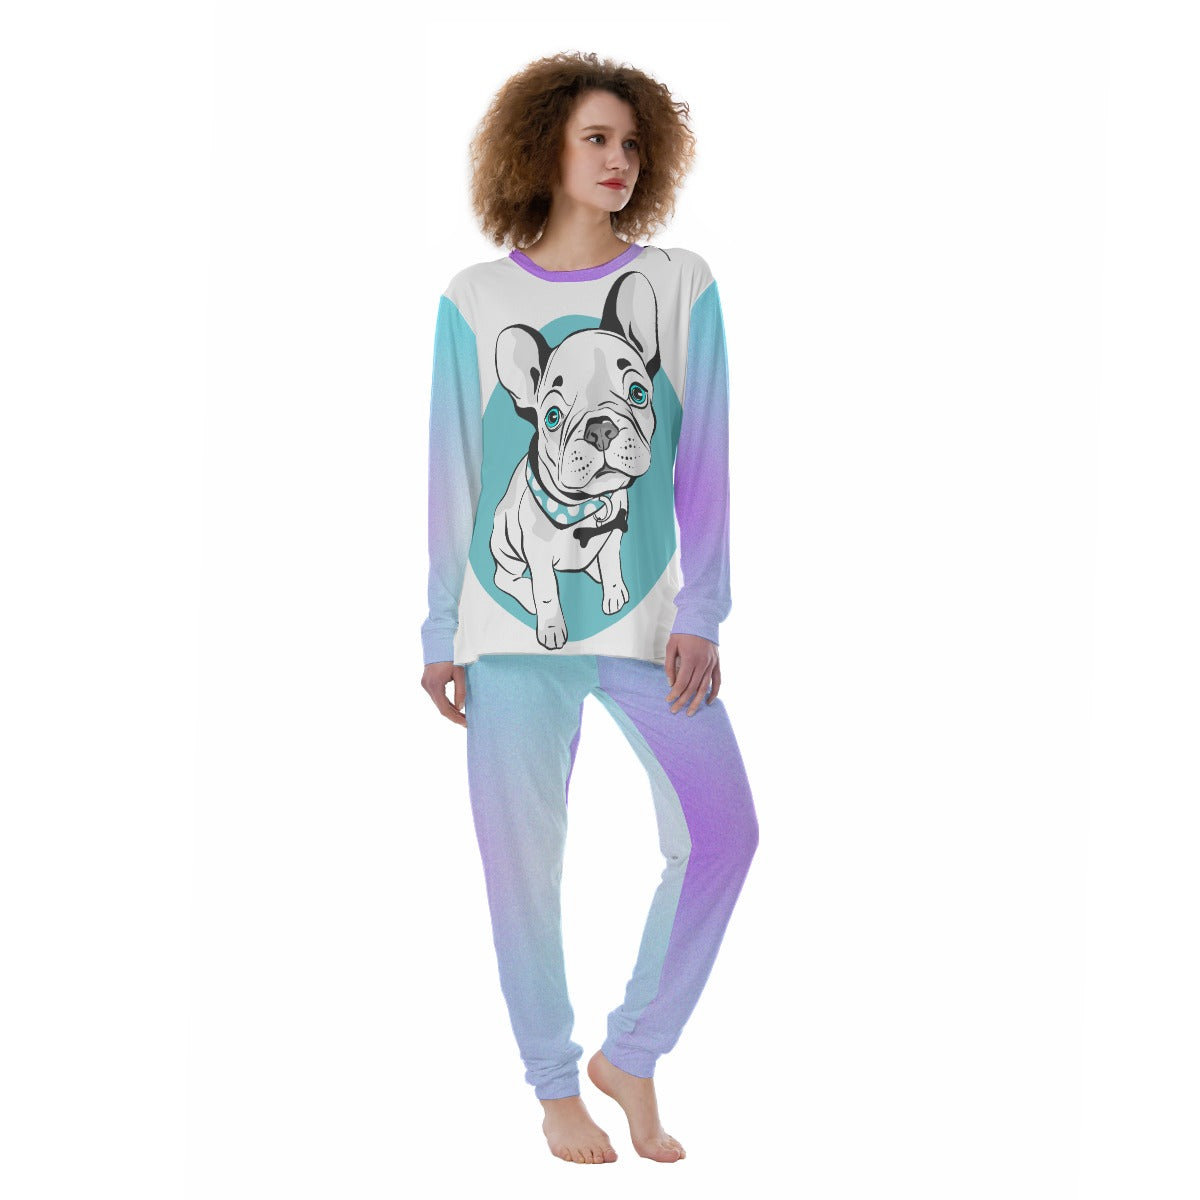 Willow - All-Over Print Women's Pajamas